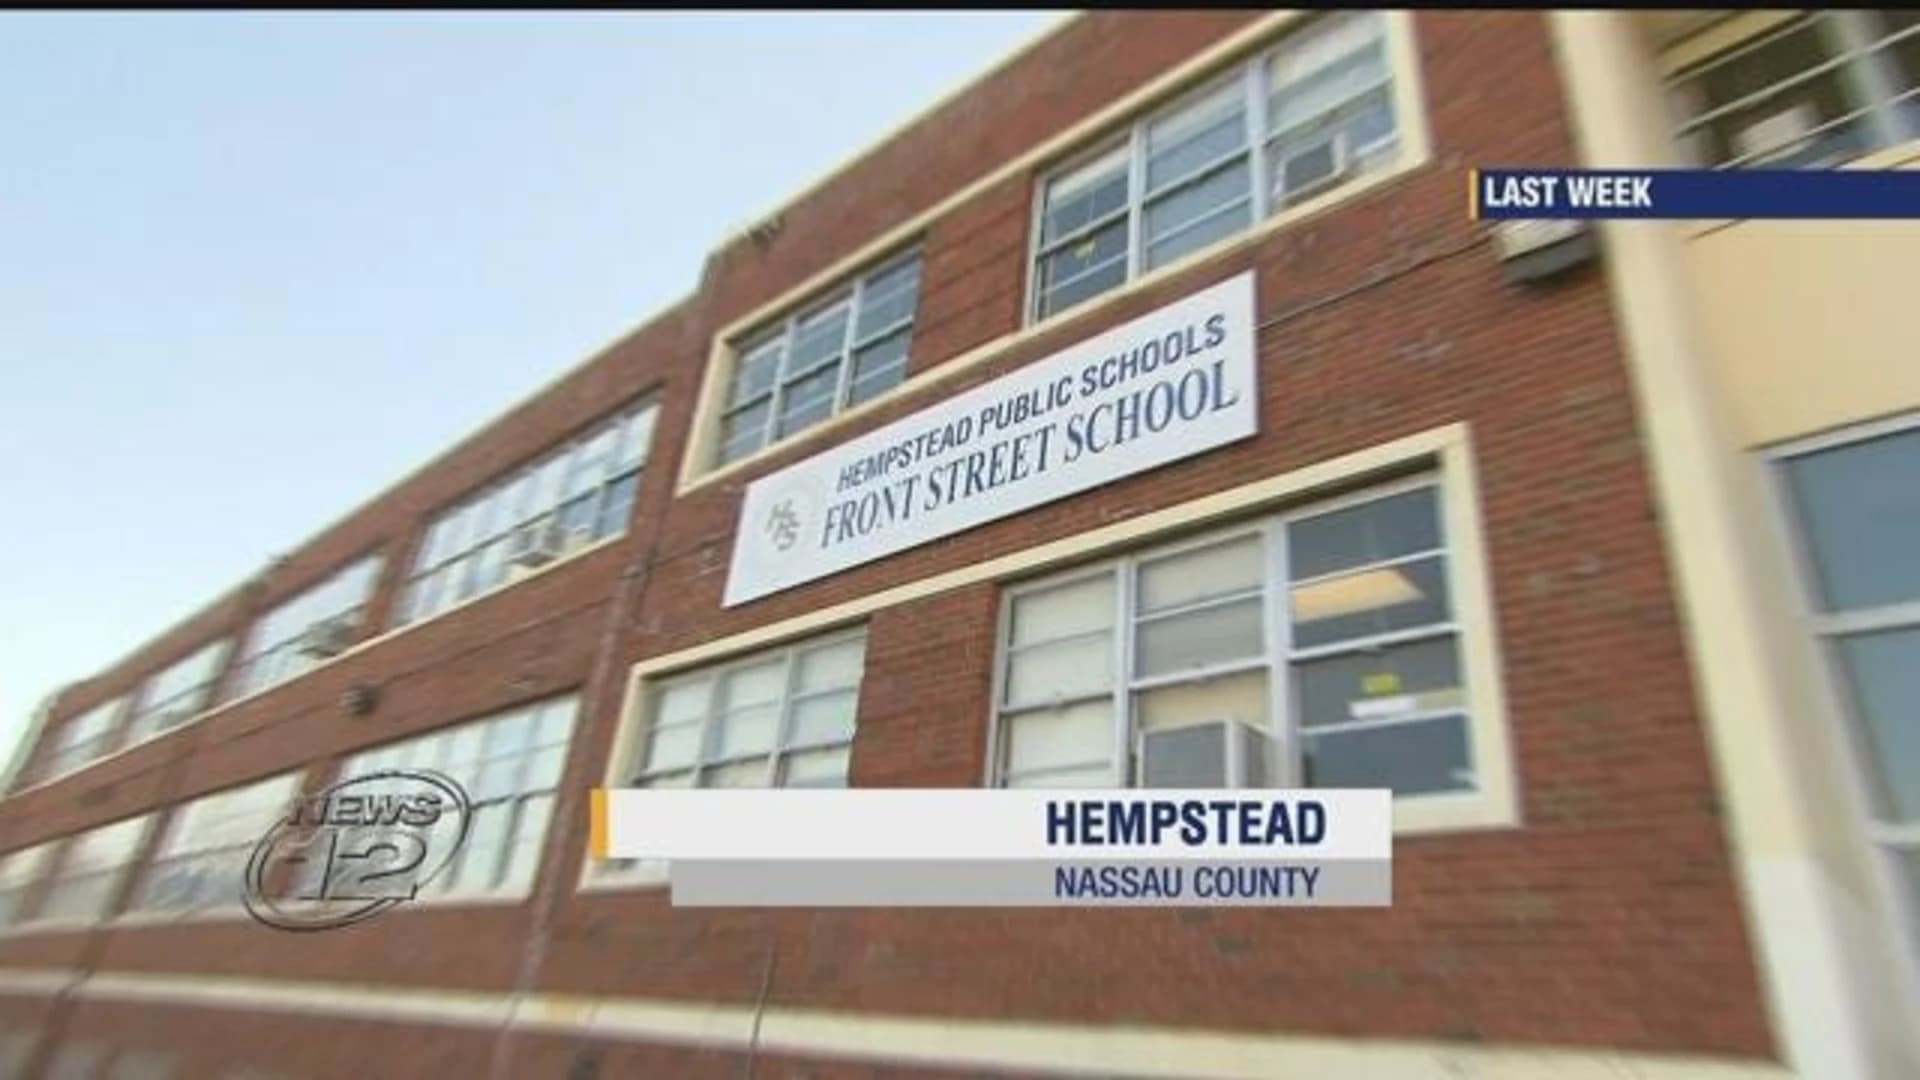 ‘Weather-related’ emergency cancels classes at Hempstead school